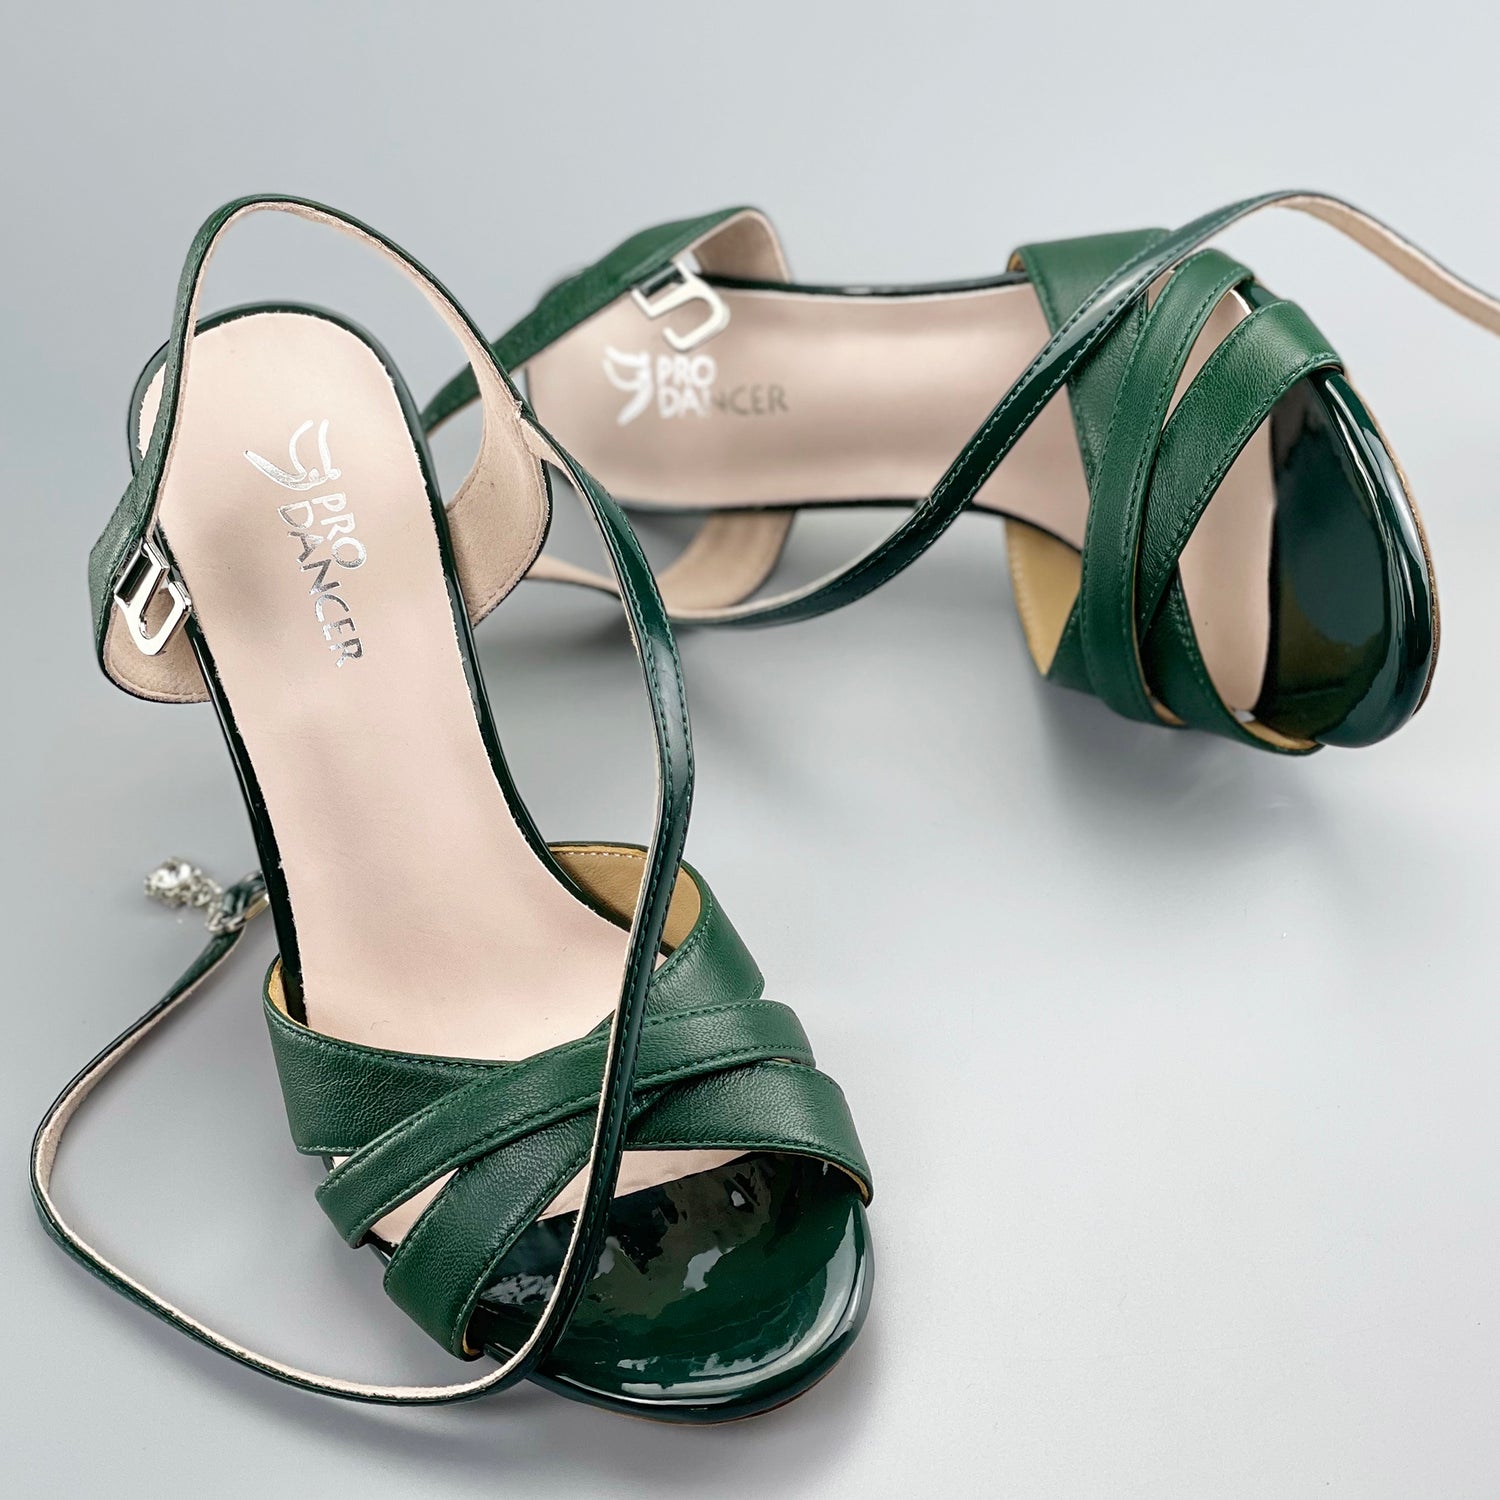 Pro Dancer Peep-toe Argentine Tango Shoes with Closed-back High Heels and Hard Leather Sole in Green0